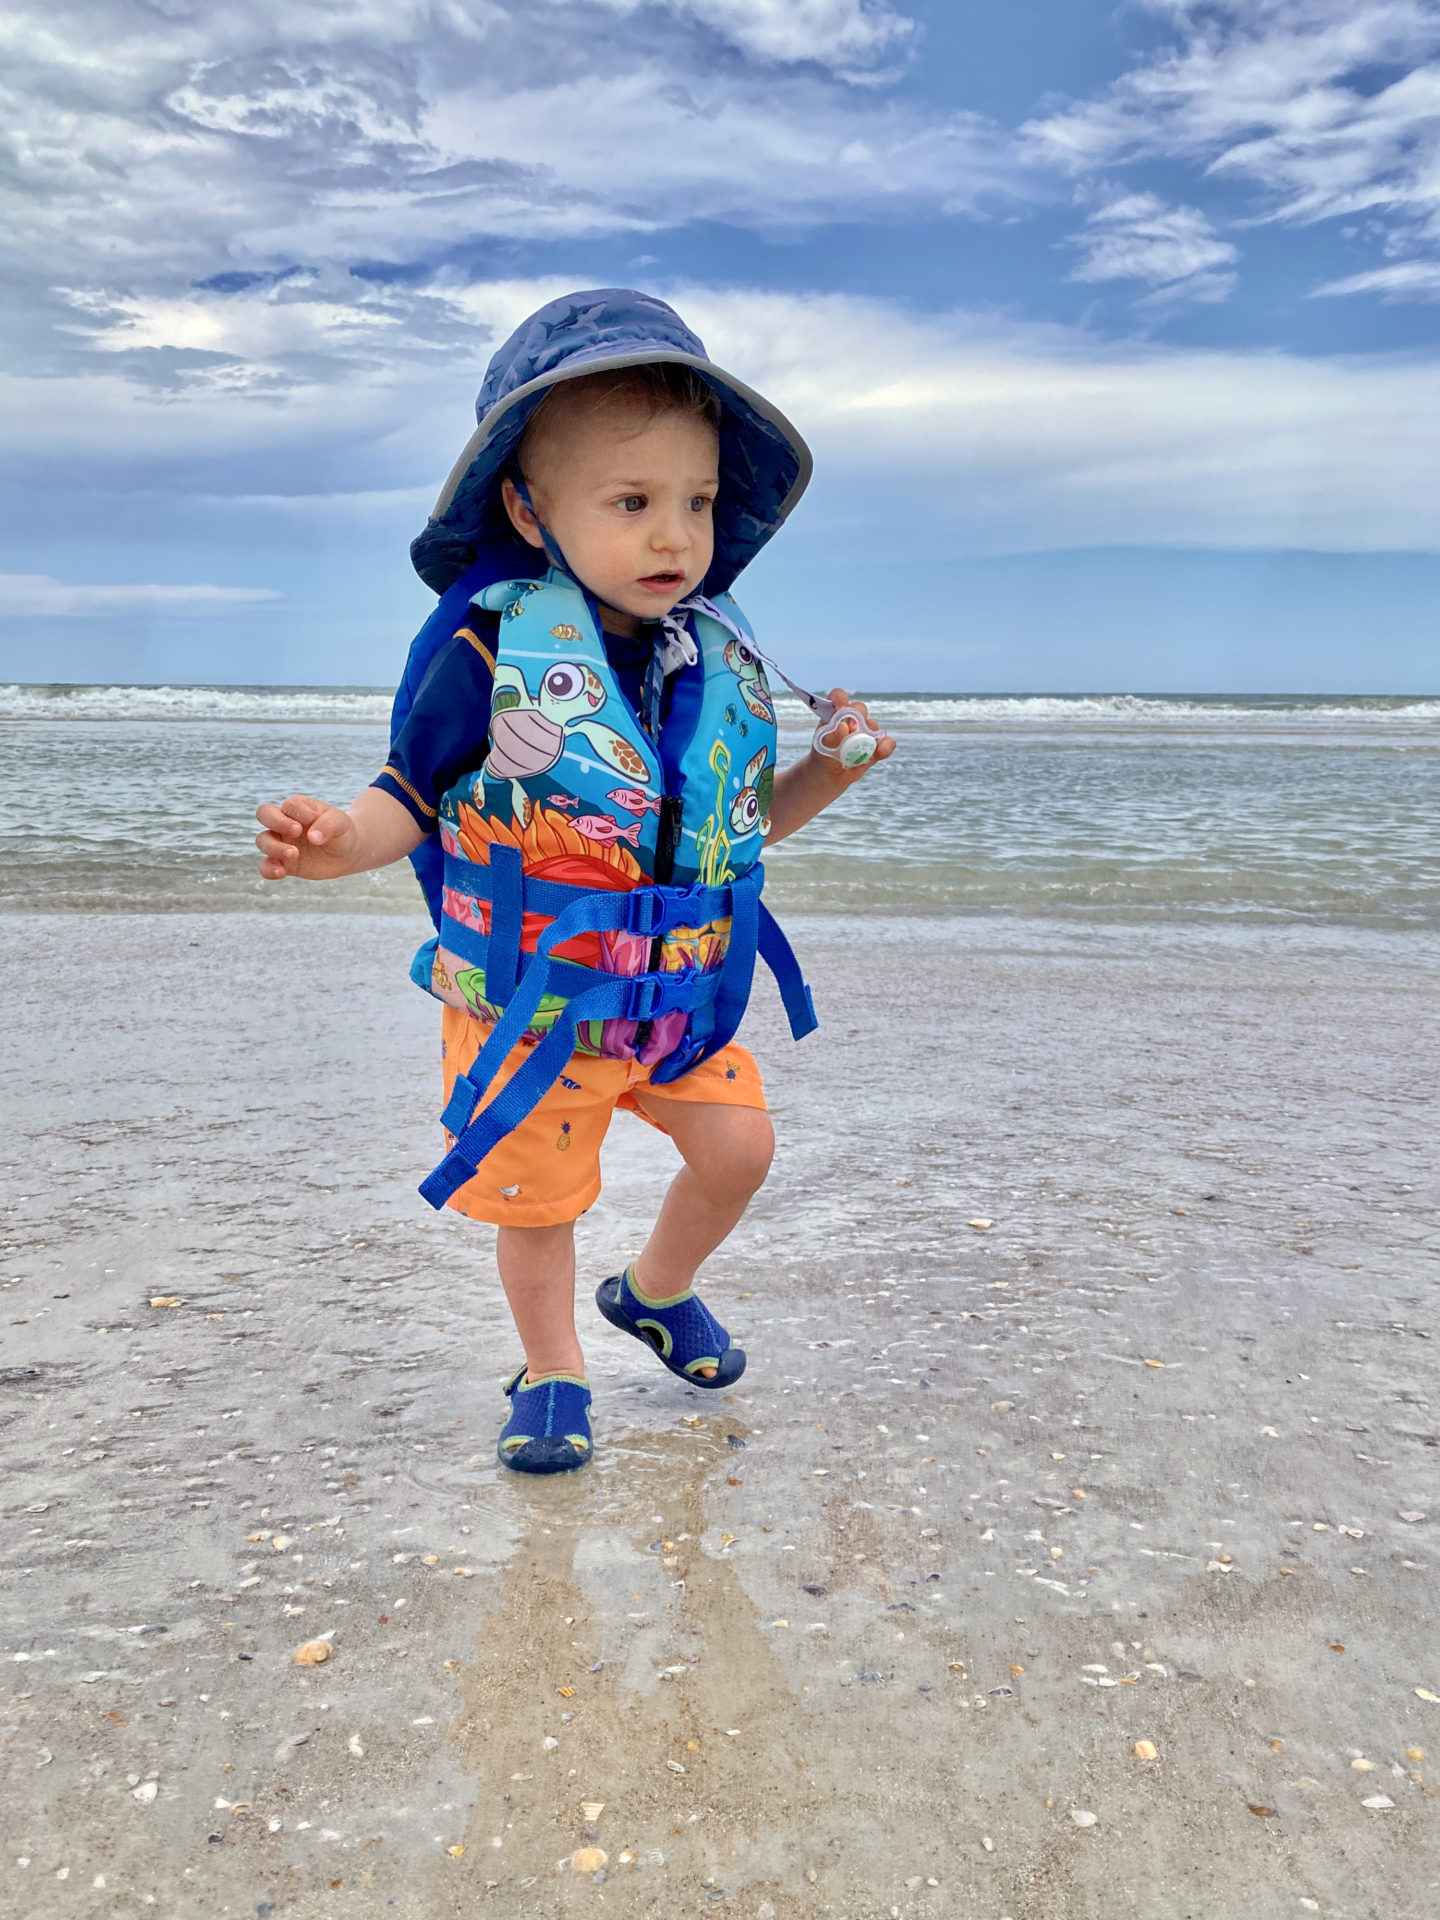 5 Beach Essentials for Toddlers - Sun Protection